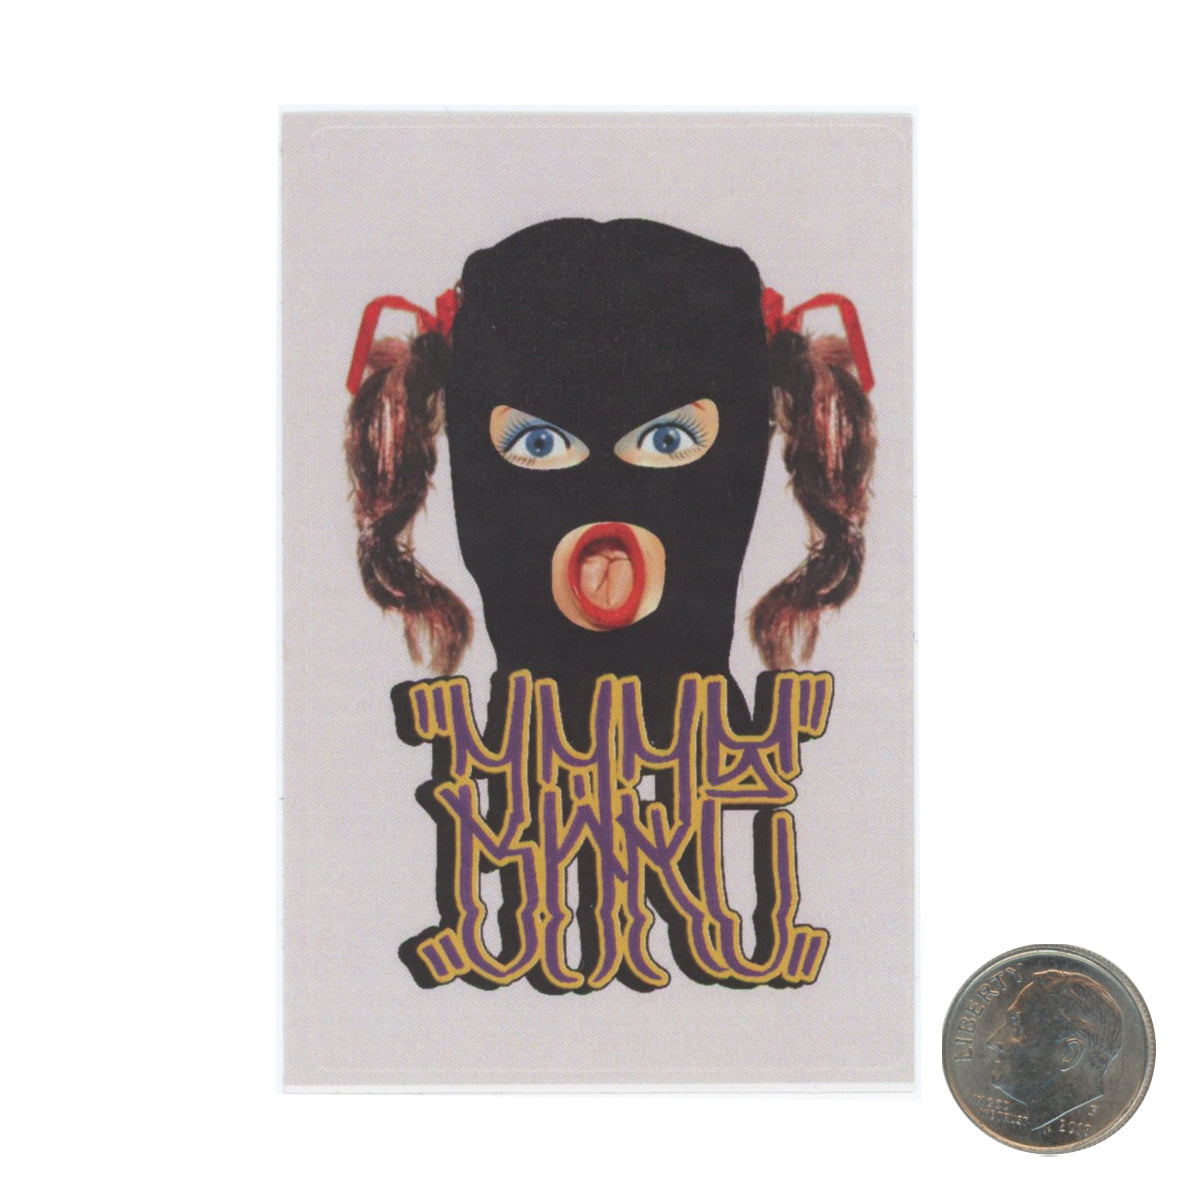 BareOne Girl in Mask Pony Tails Sticker